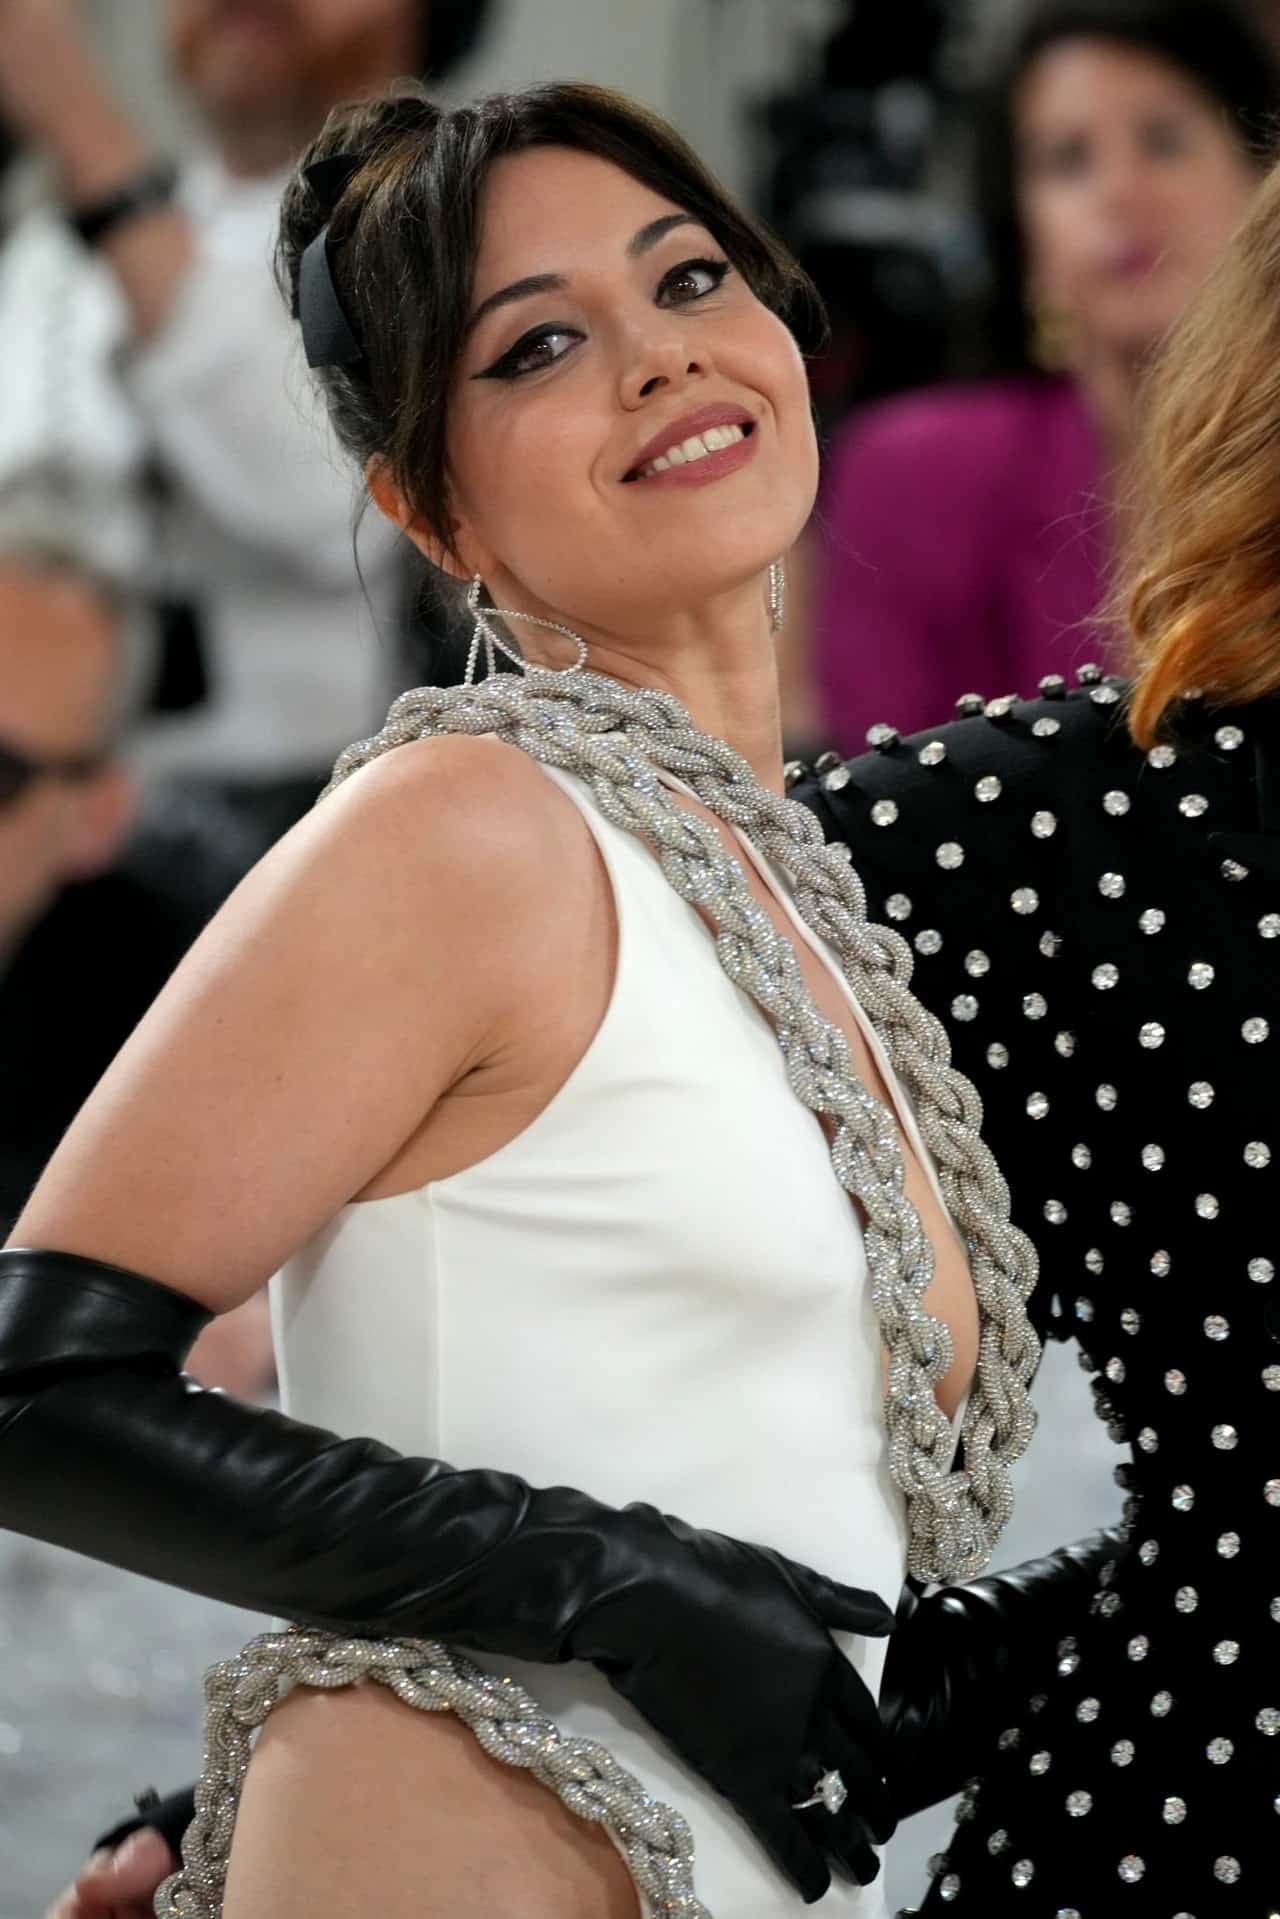 Aubrey Plaza attended the 2023 Met Gala in New York City on May 01, 2023, which celebrated the theme of "Karl Lagerfeld: A Line of Beauty" at the Metropolitan Museum of Art.